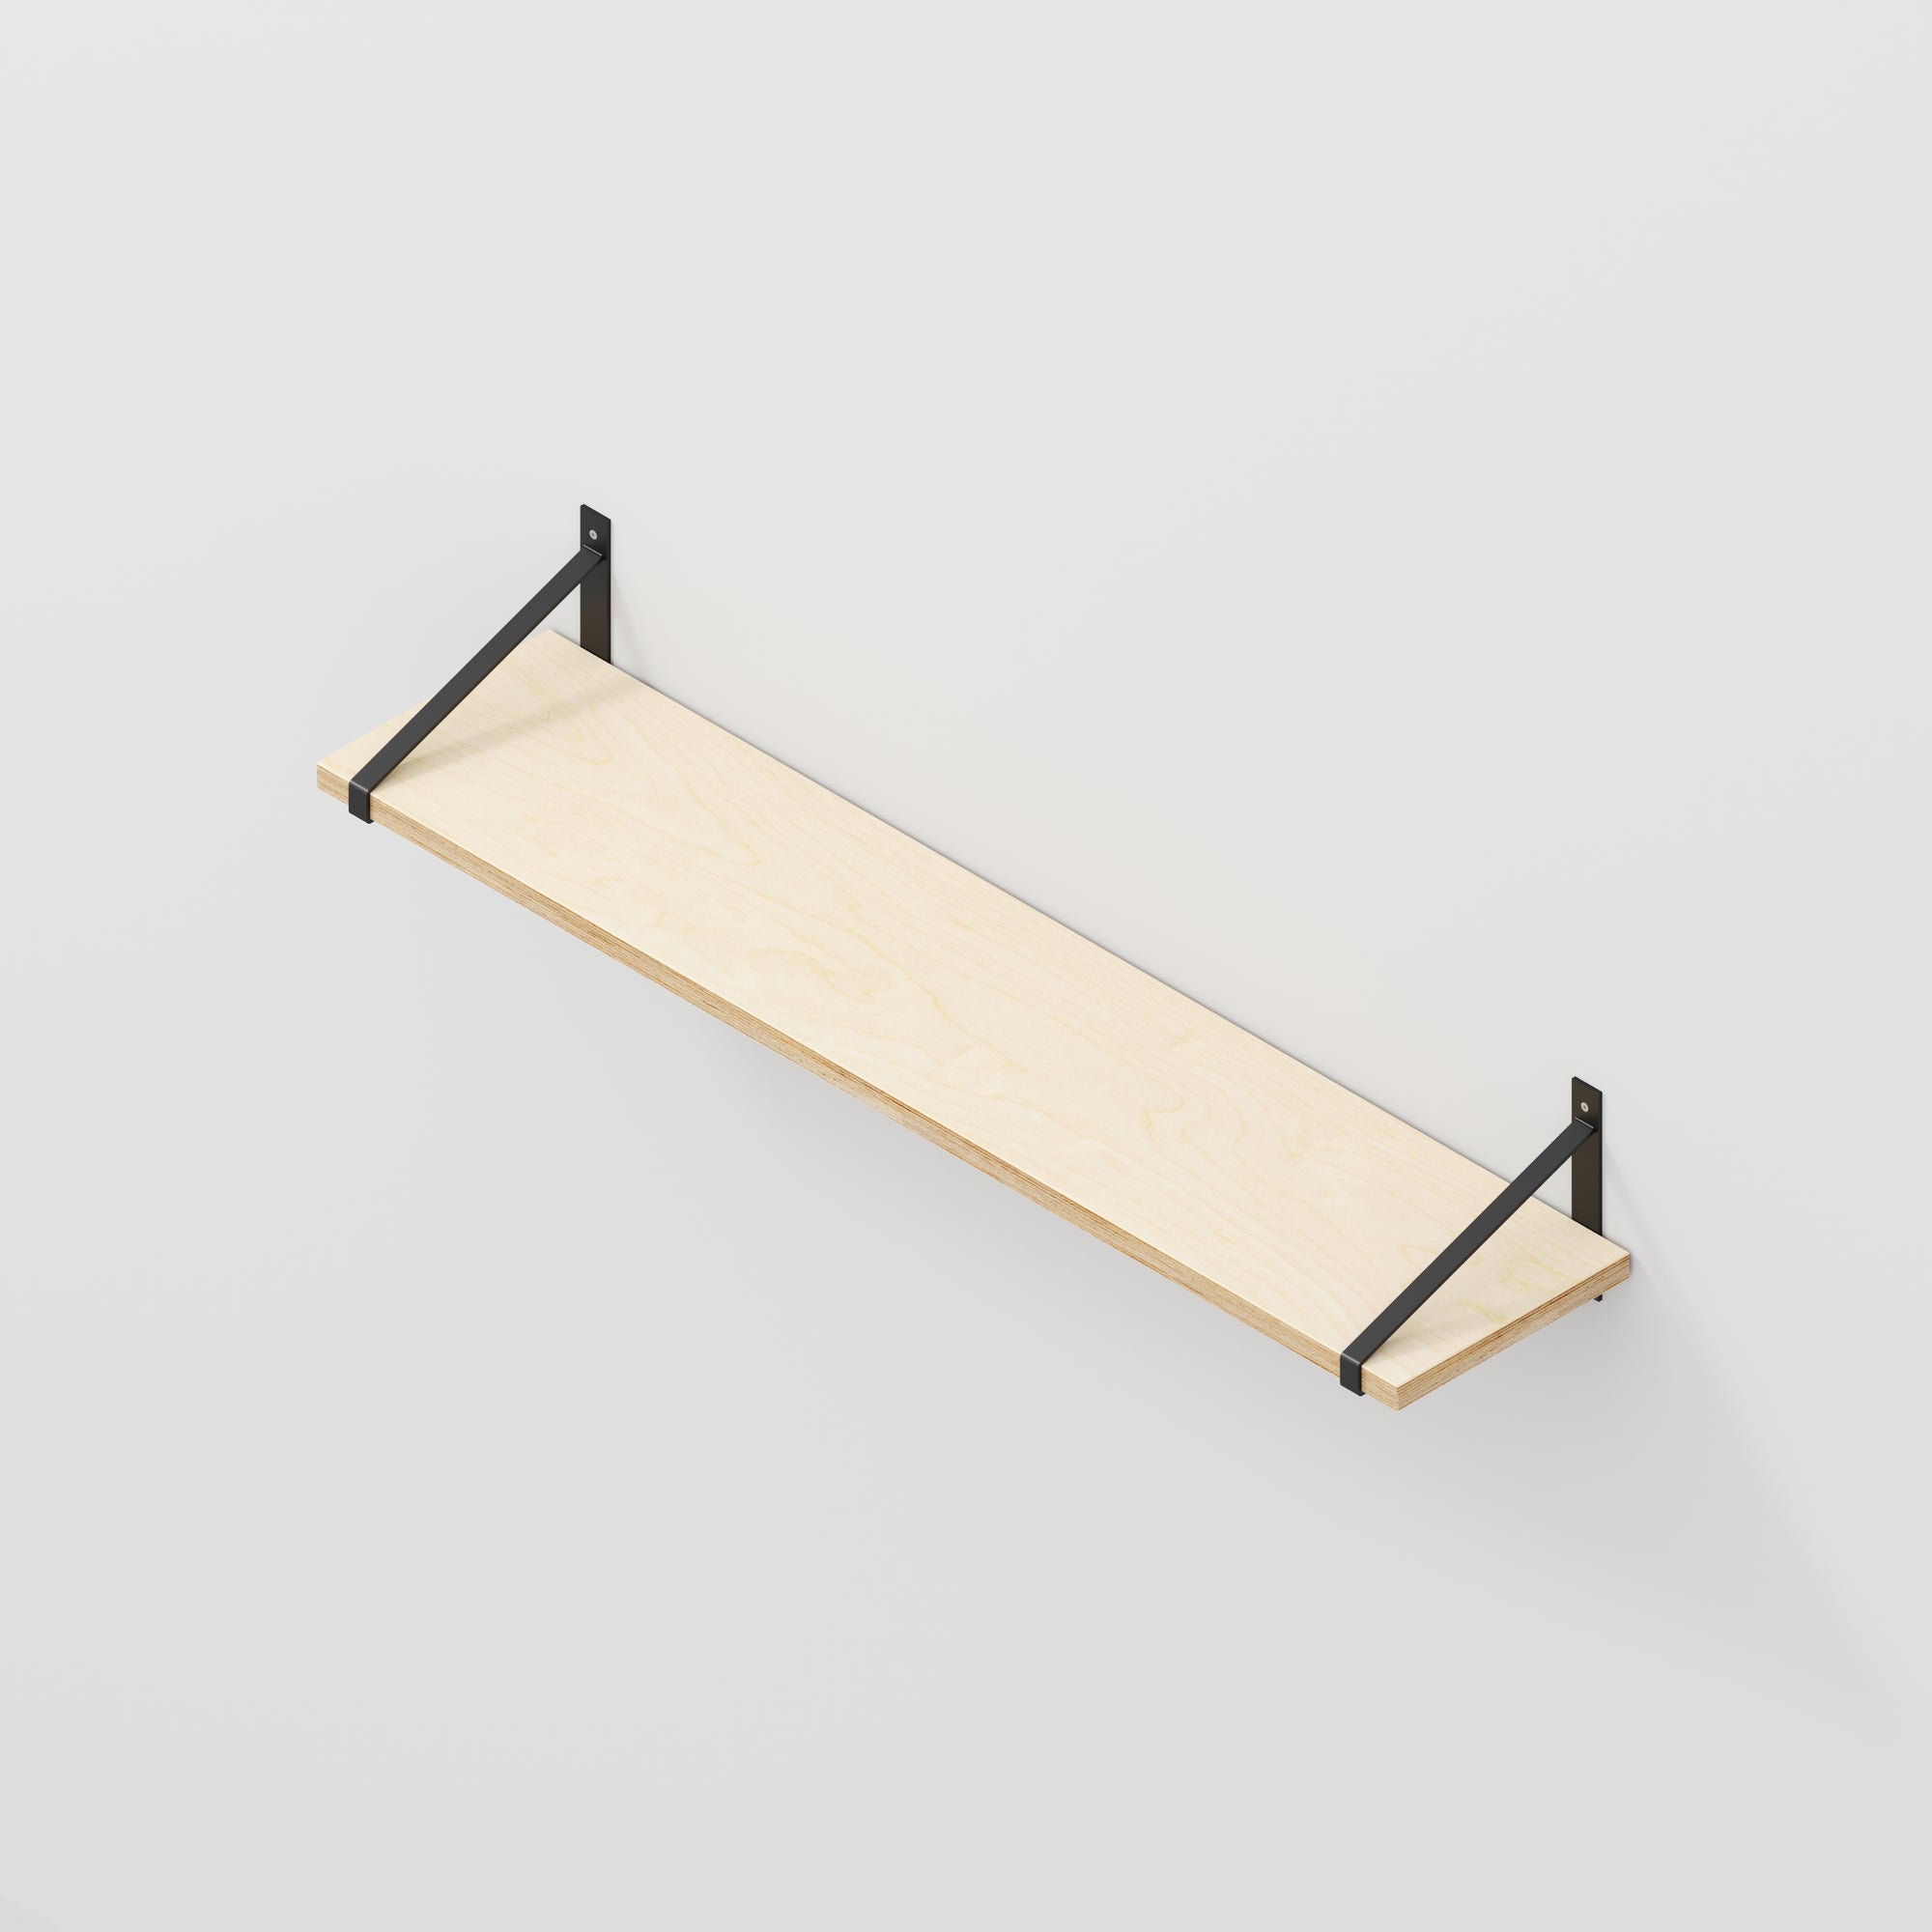 Made in Ply | Custom, Made to Measure Plywood Wall Shelf with Brackets